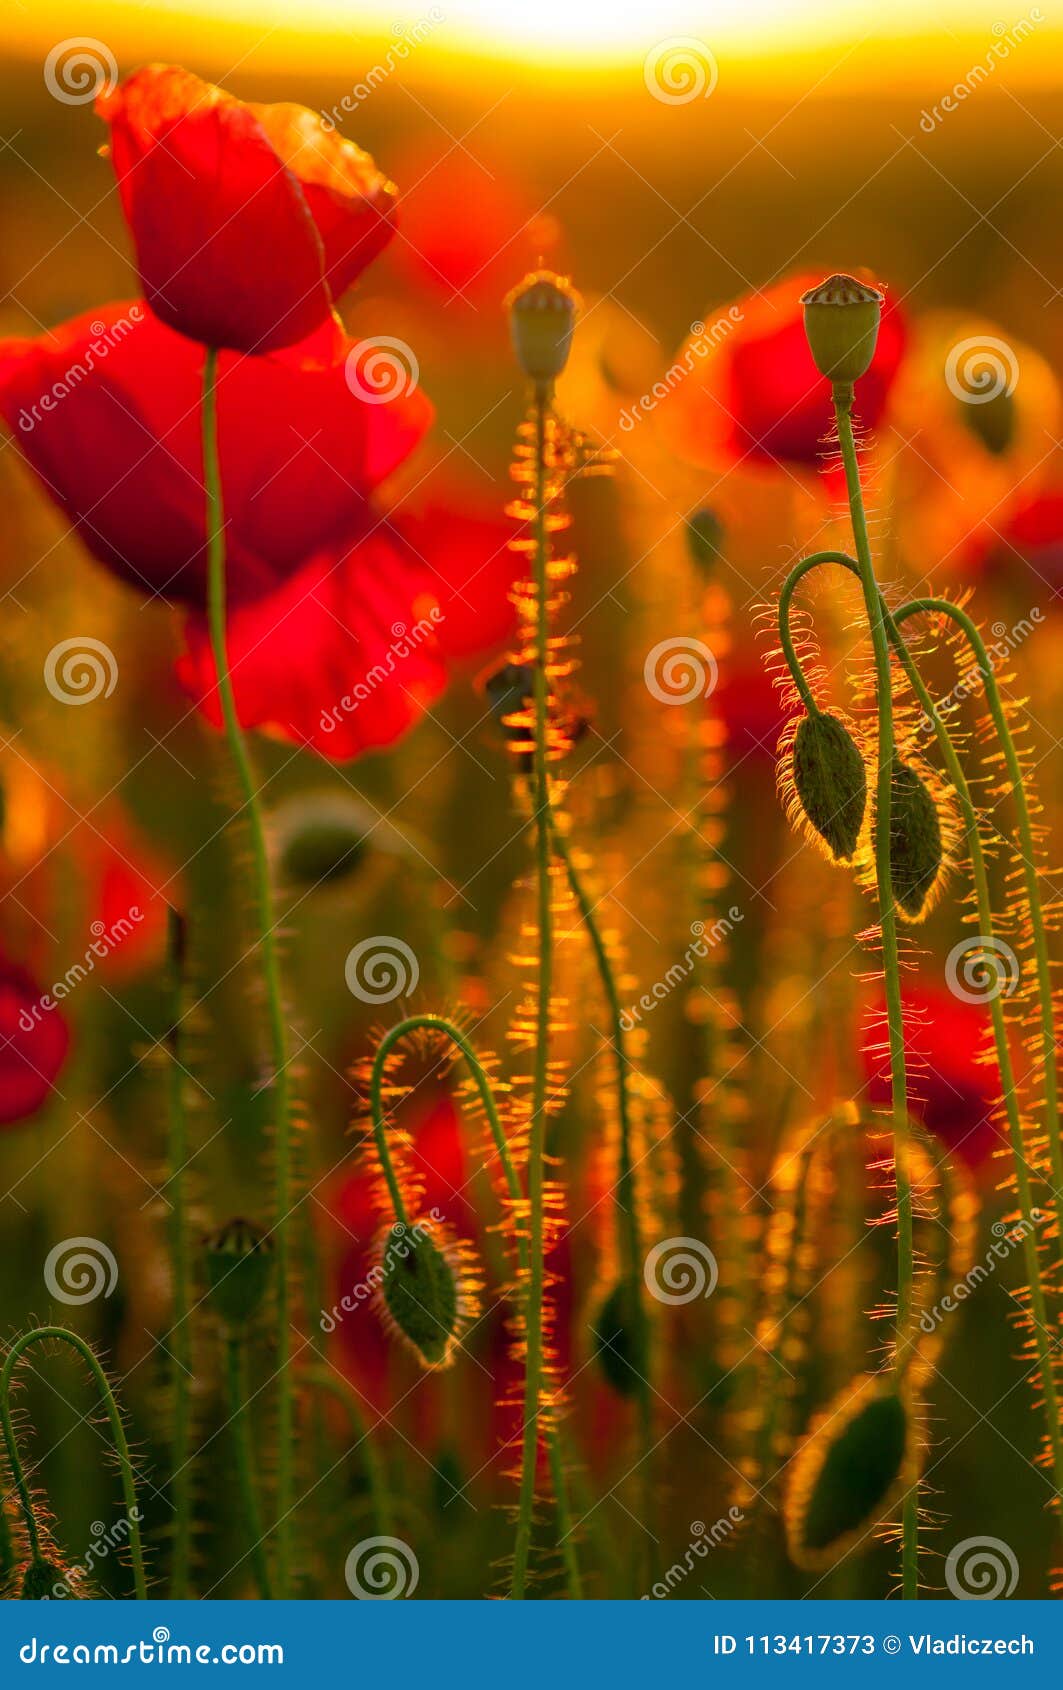 Detail of Field of Poppies in Sunset in a Shallow Depth of Field ...